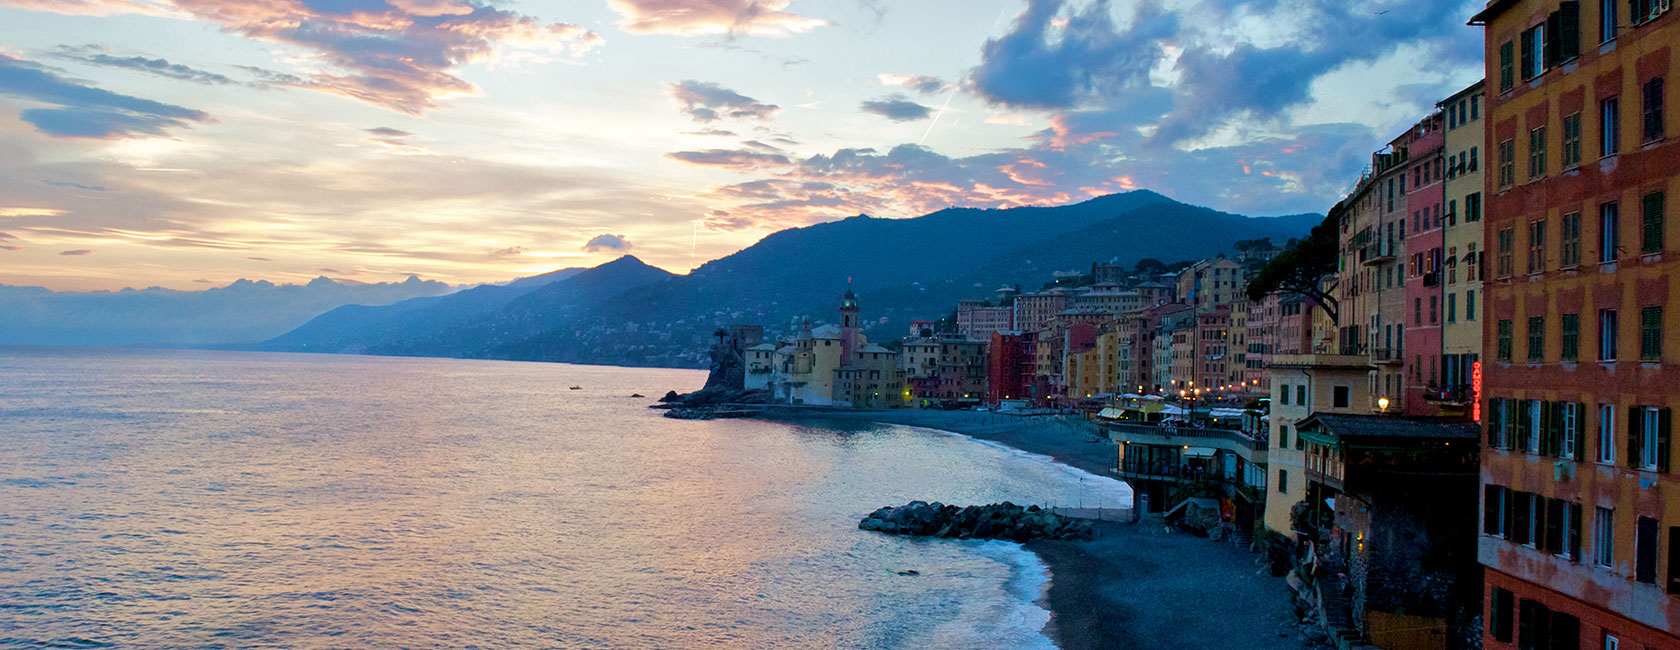 CAMOGLI: 5 CURIOSITIES THAT YOU PROBABLY DID NOT KNOW ABOUT